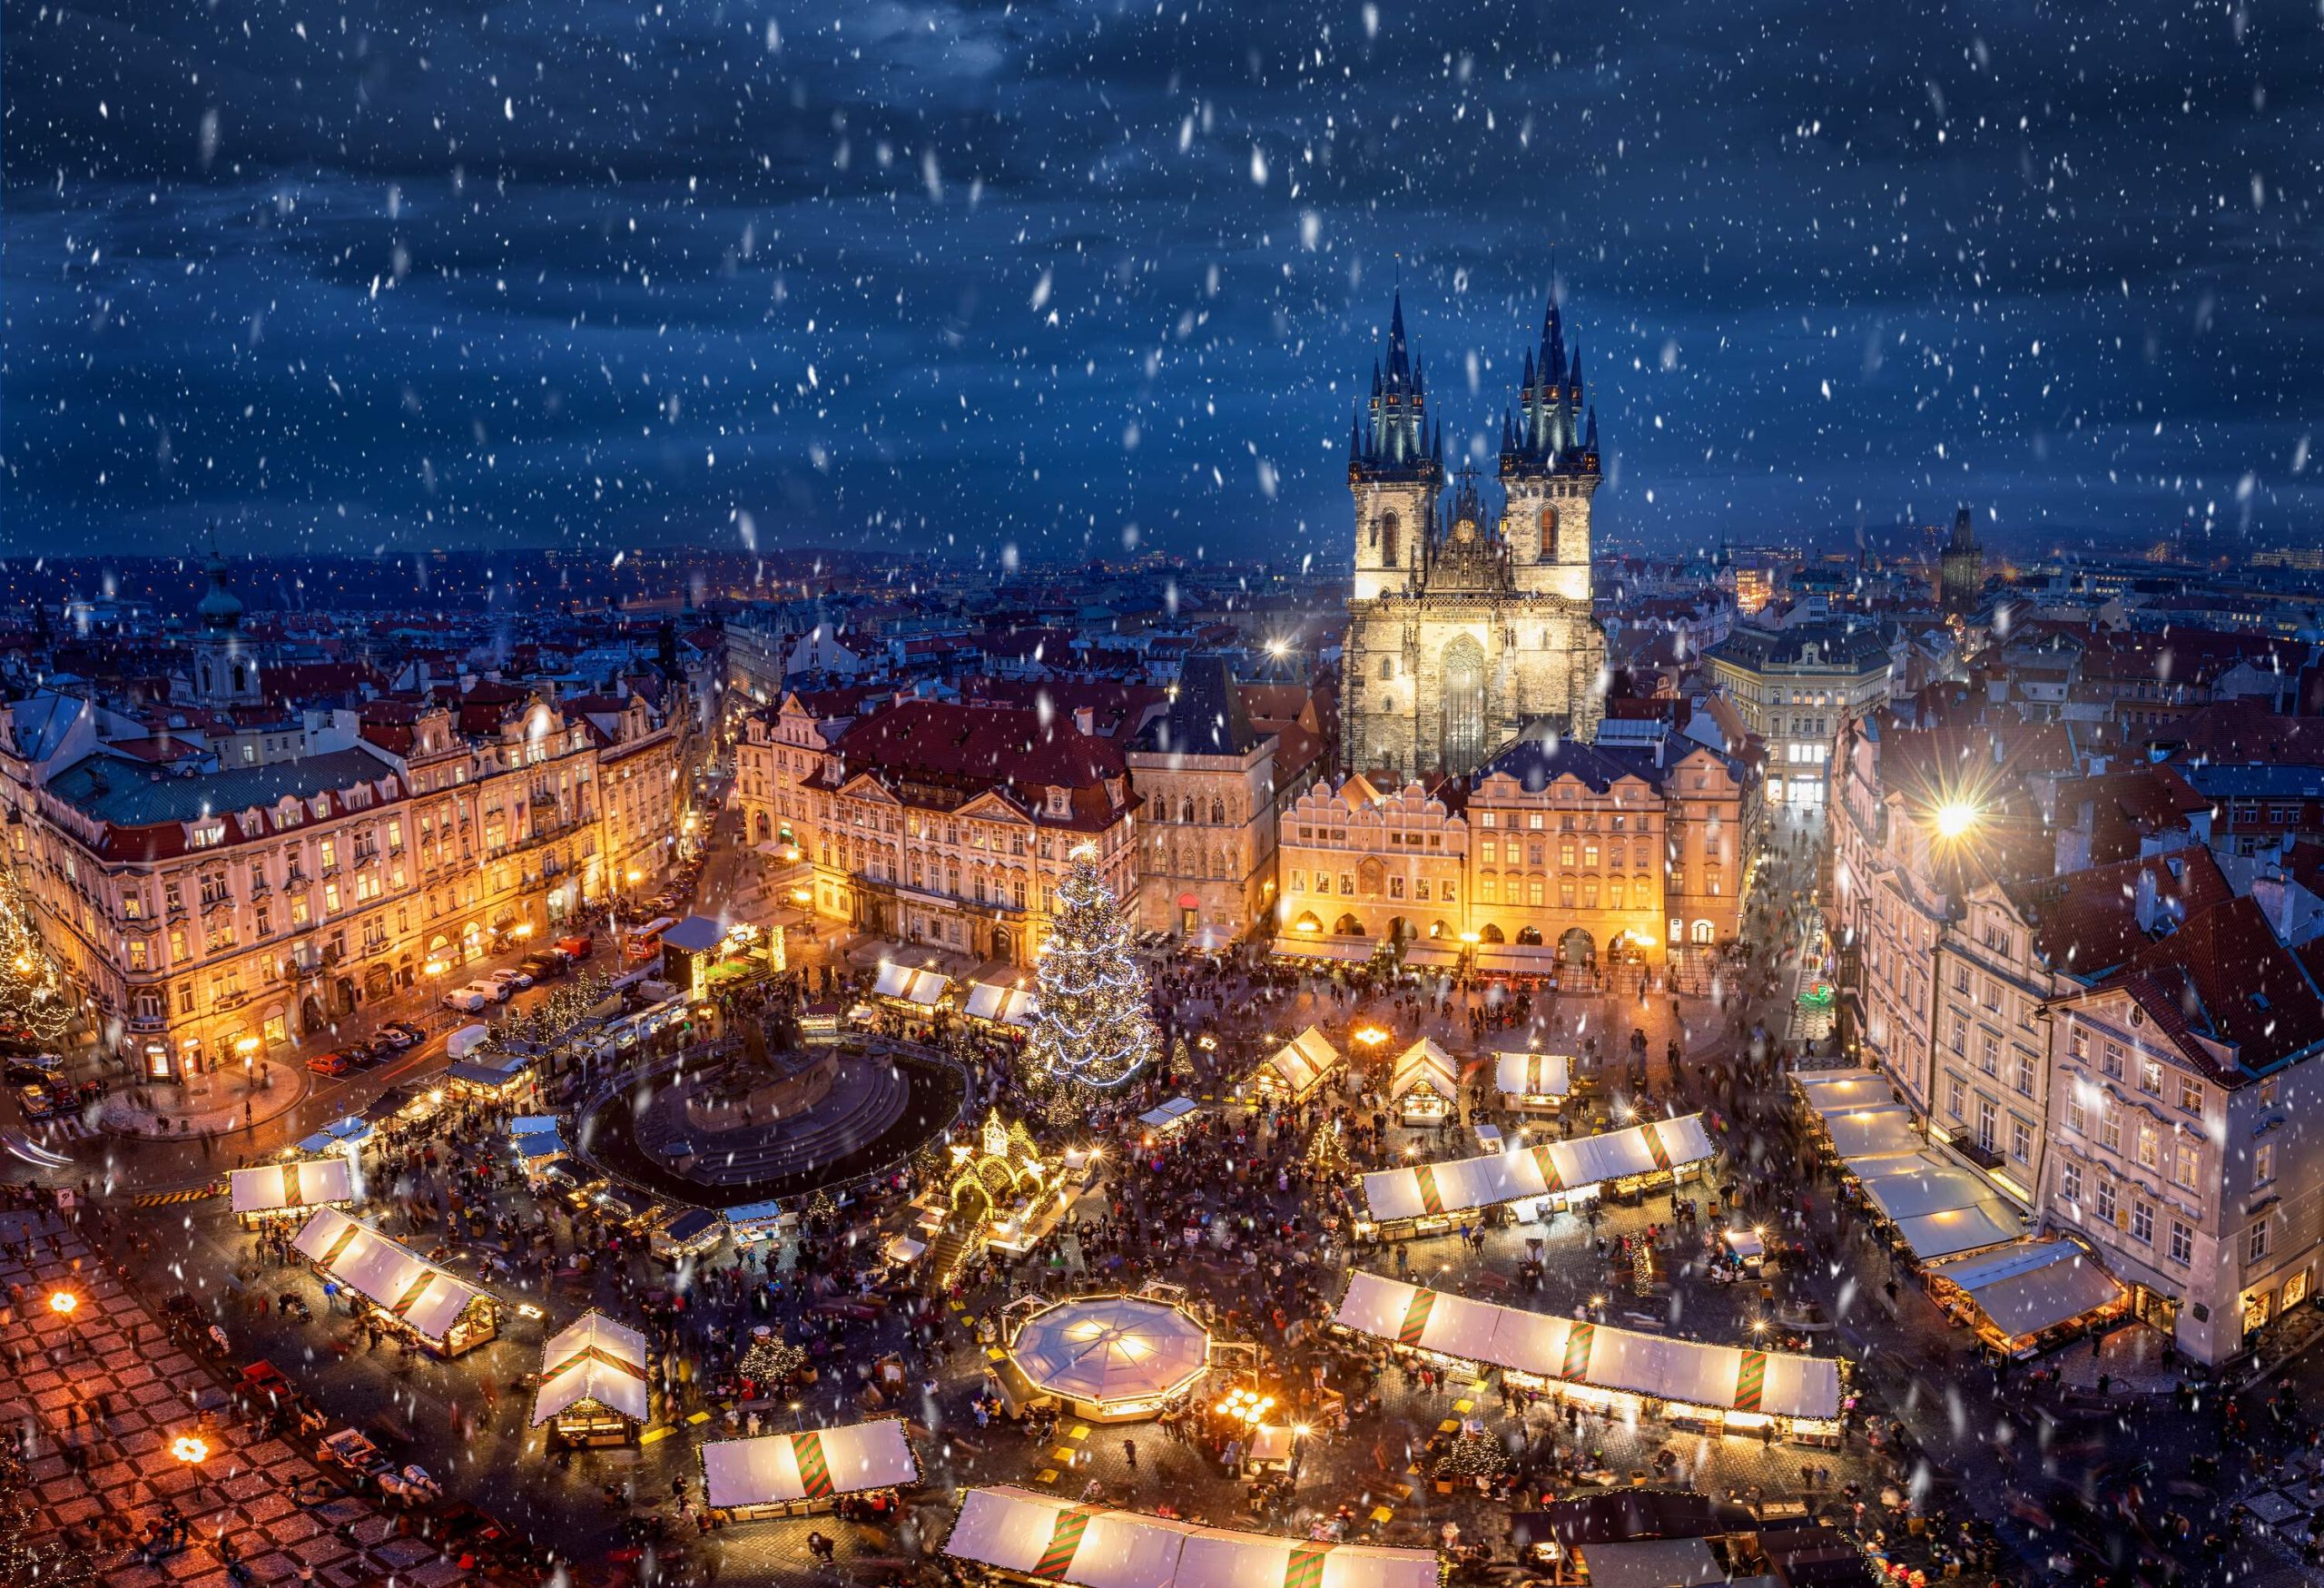 Snowflakes fall into the brightly lit, bustling square framed by buildings on a scenic festive Christmas season.